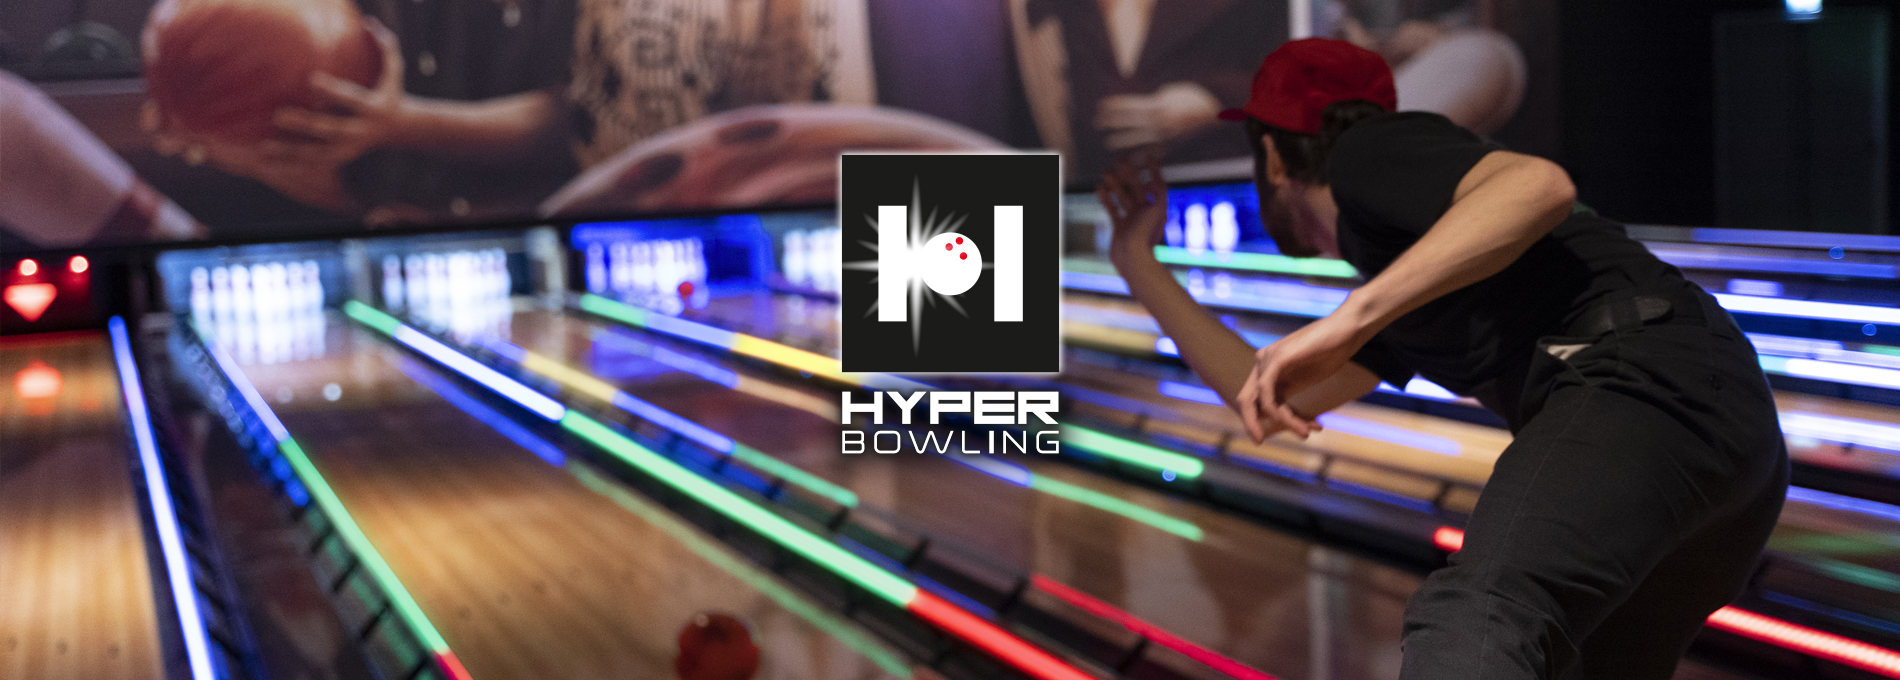 QubicaAMF Bowling HyperBowling Bowl Expo 2019 Banner